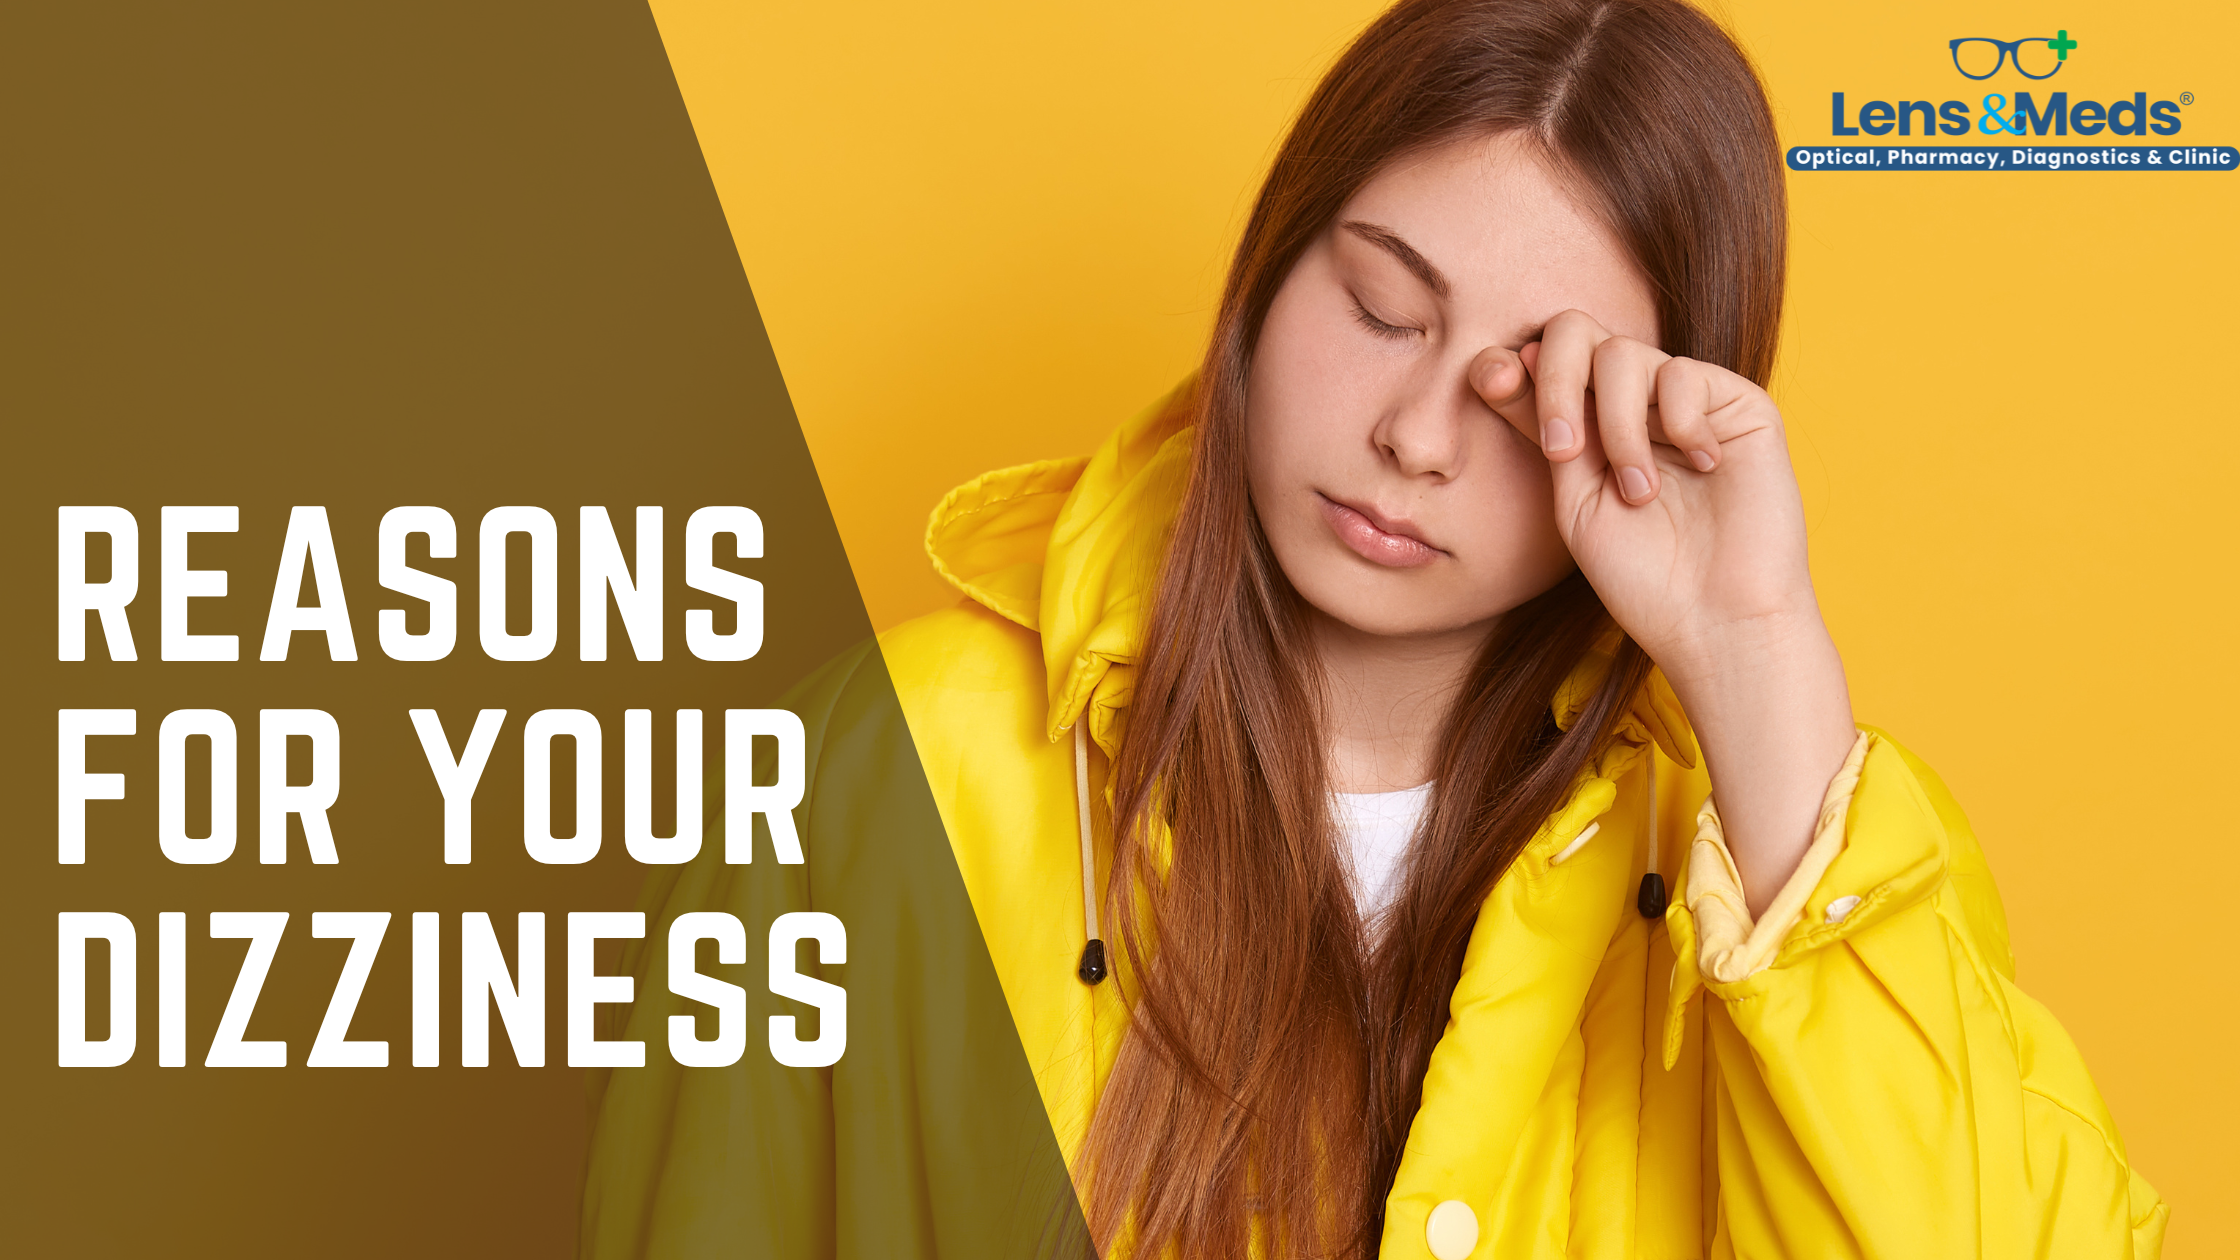 Don’t Ignore the Signs: Reasons for Your Dizziness